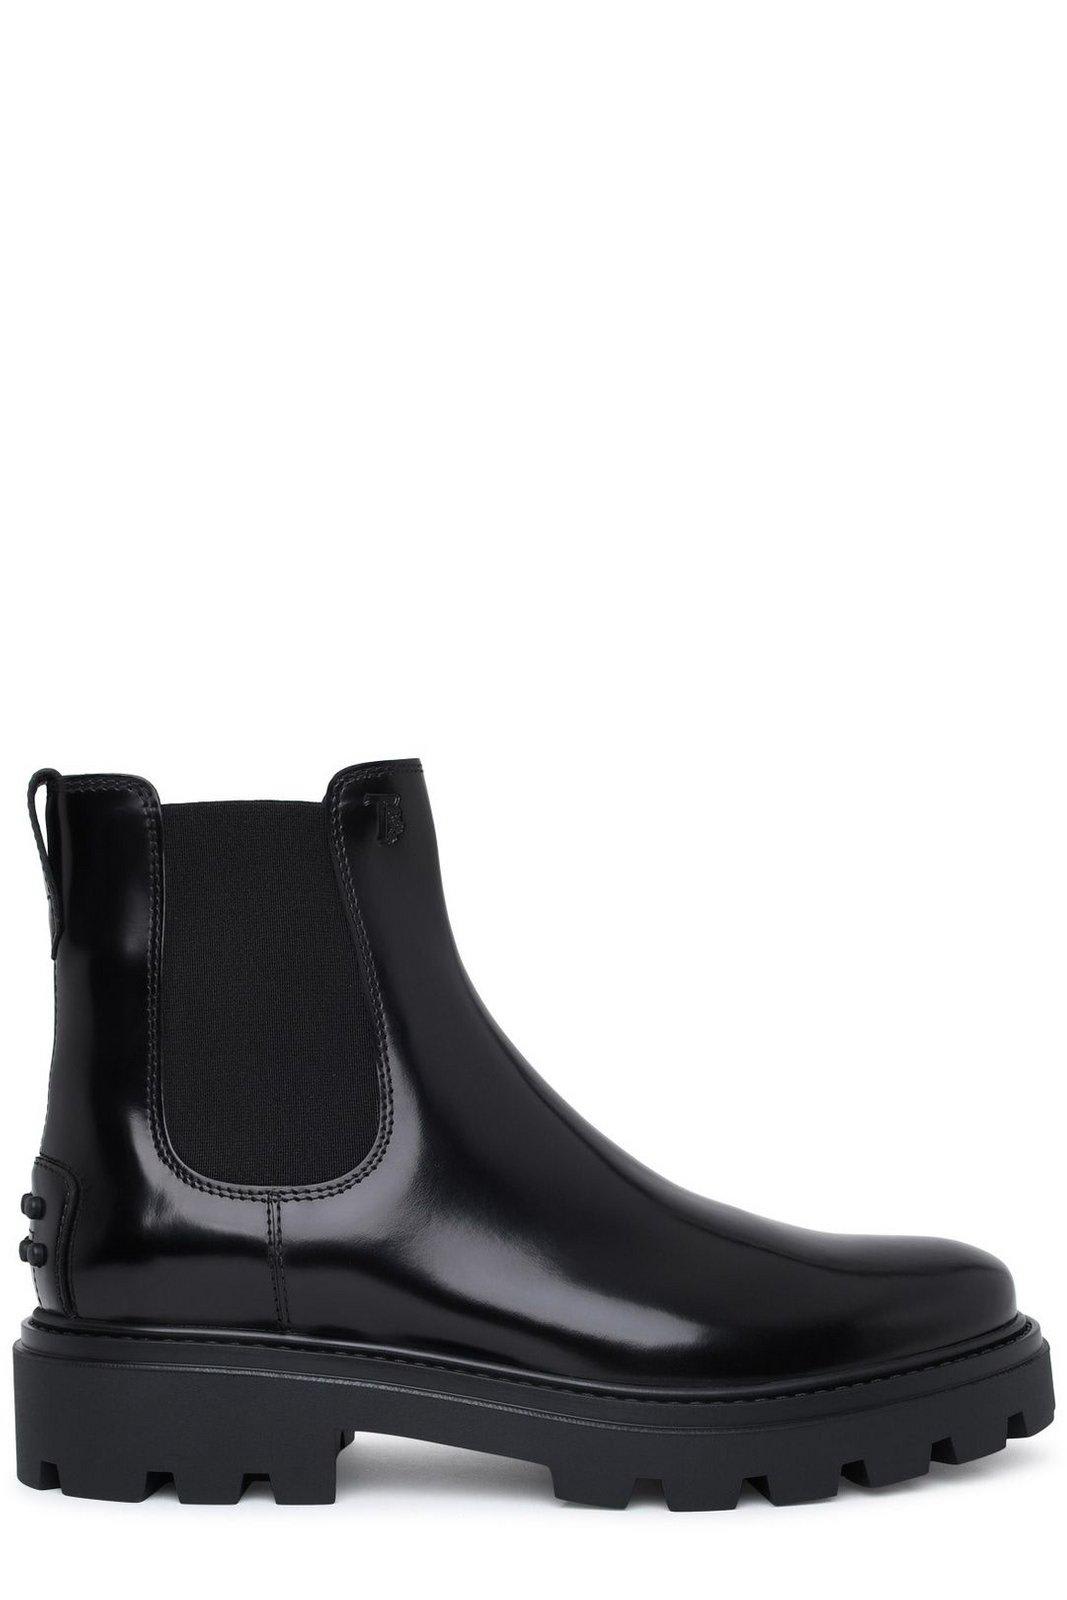 TOD'S CLASSIC CHUNKY ANKLE BOOTS